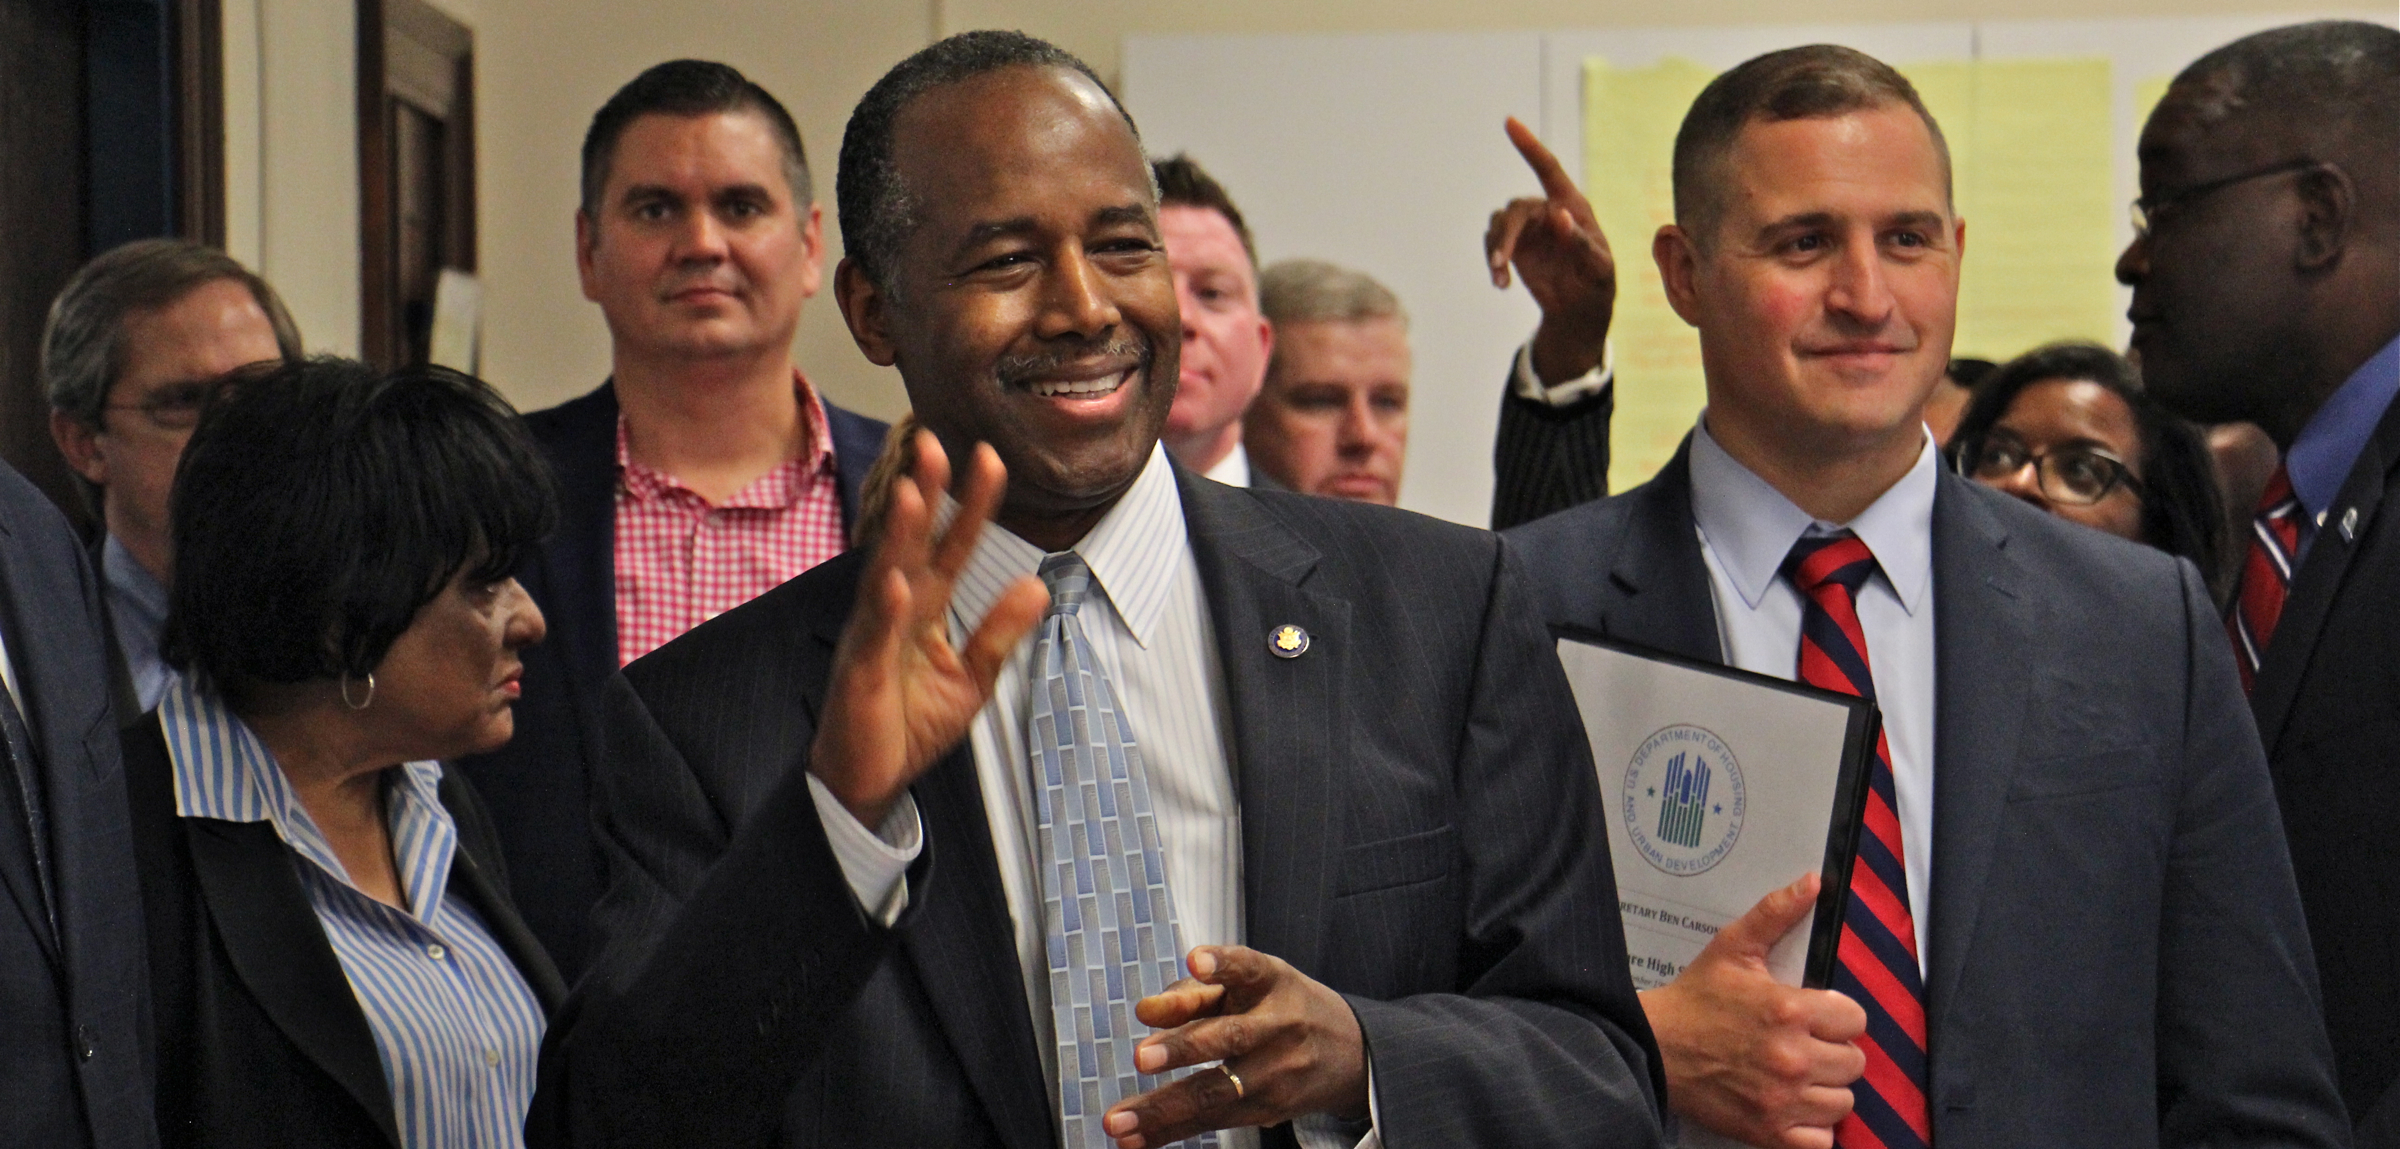 HUD Sec. Ben Carson tours Veterans Multi Service Center in Philadelphia, flanked by Councilwoman Jannie Blackwell and HUD regional administrator Joe DeFelice